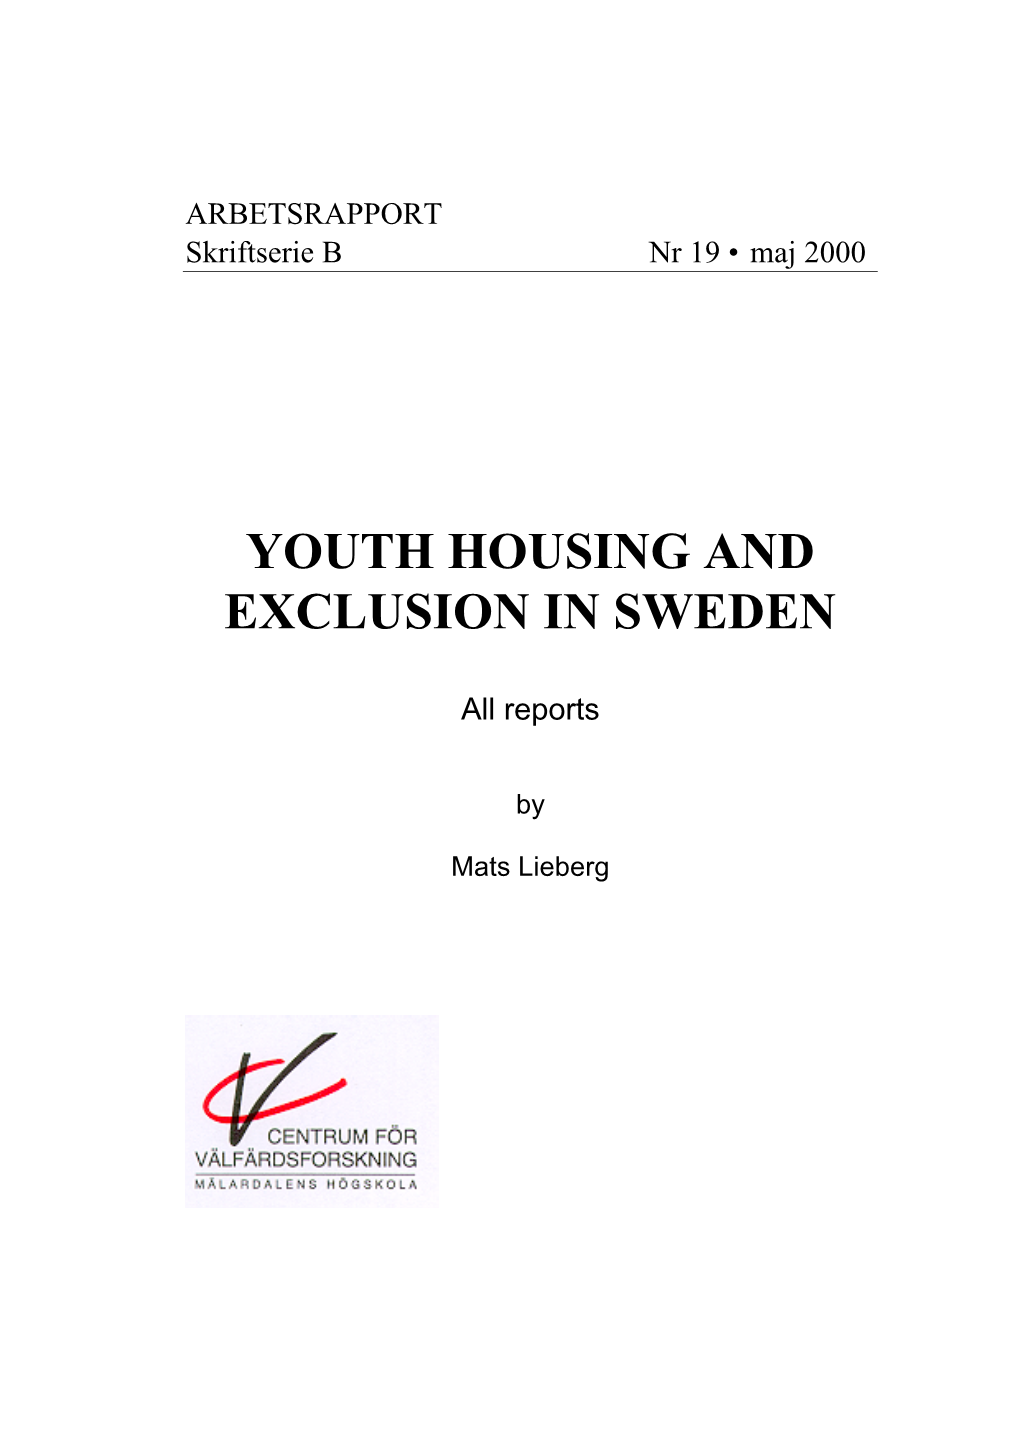 Youth Housing and Exclusion in Sweden